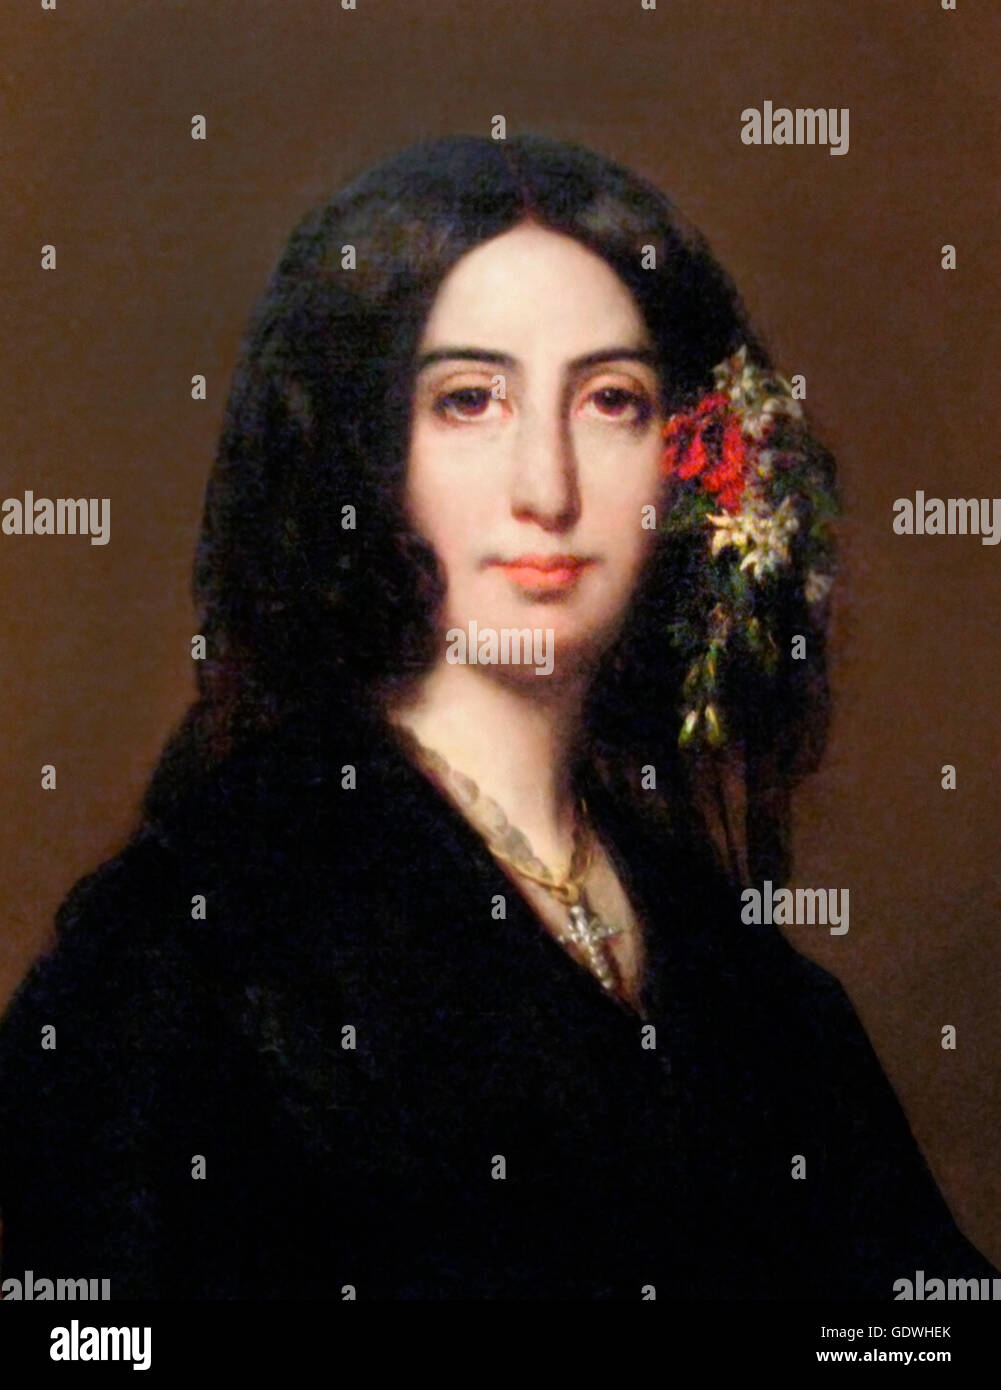 George Sand. Portrait of the French writer, George Sand (Amantine-Lucile-Aurore Dupin: 1804-1876), famous for her affair with the composer Frederic Chopin. From a portrait by Auguste Charpentier, 1838. Stock Photo